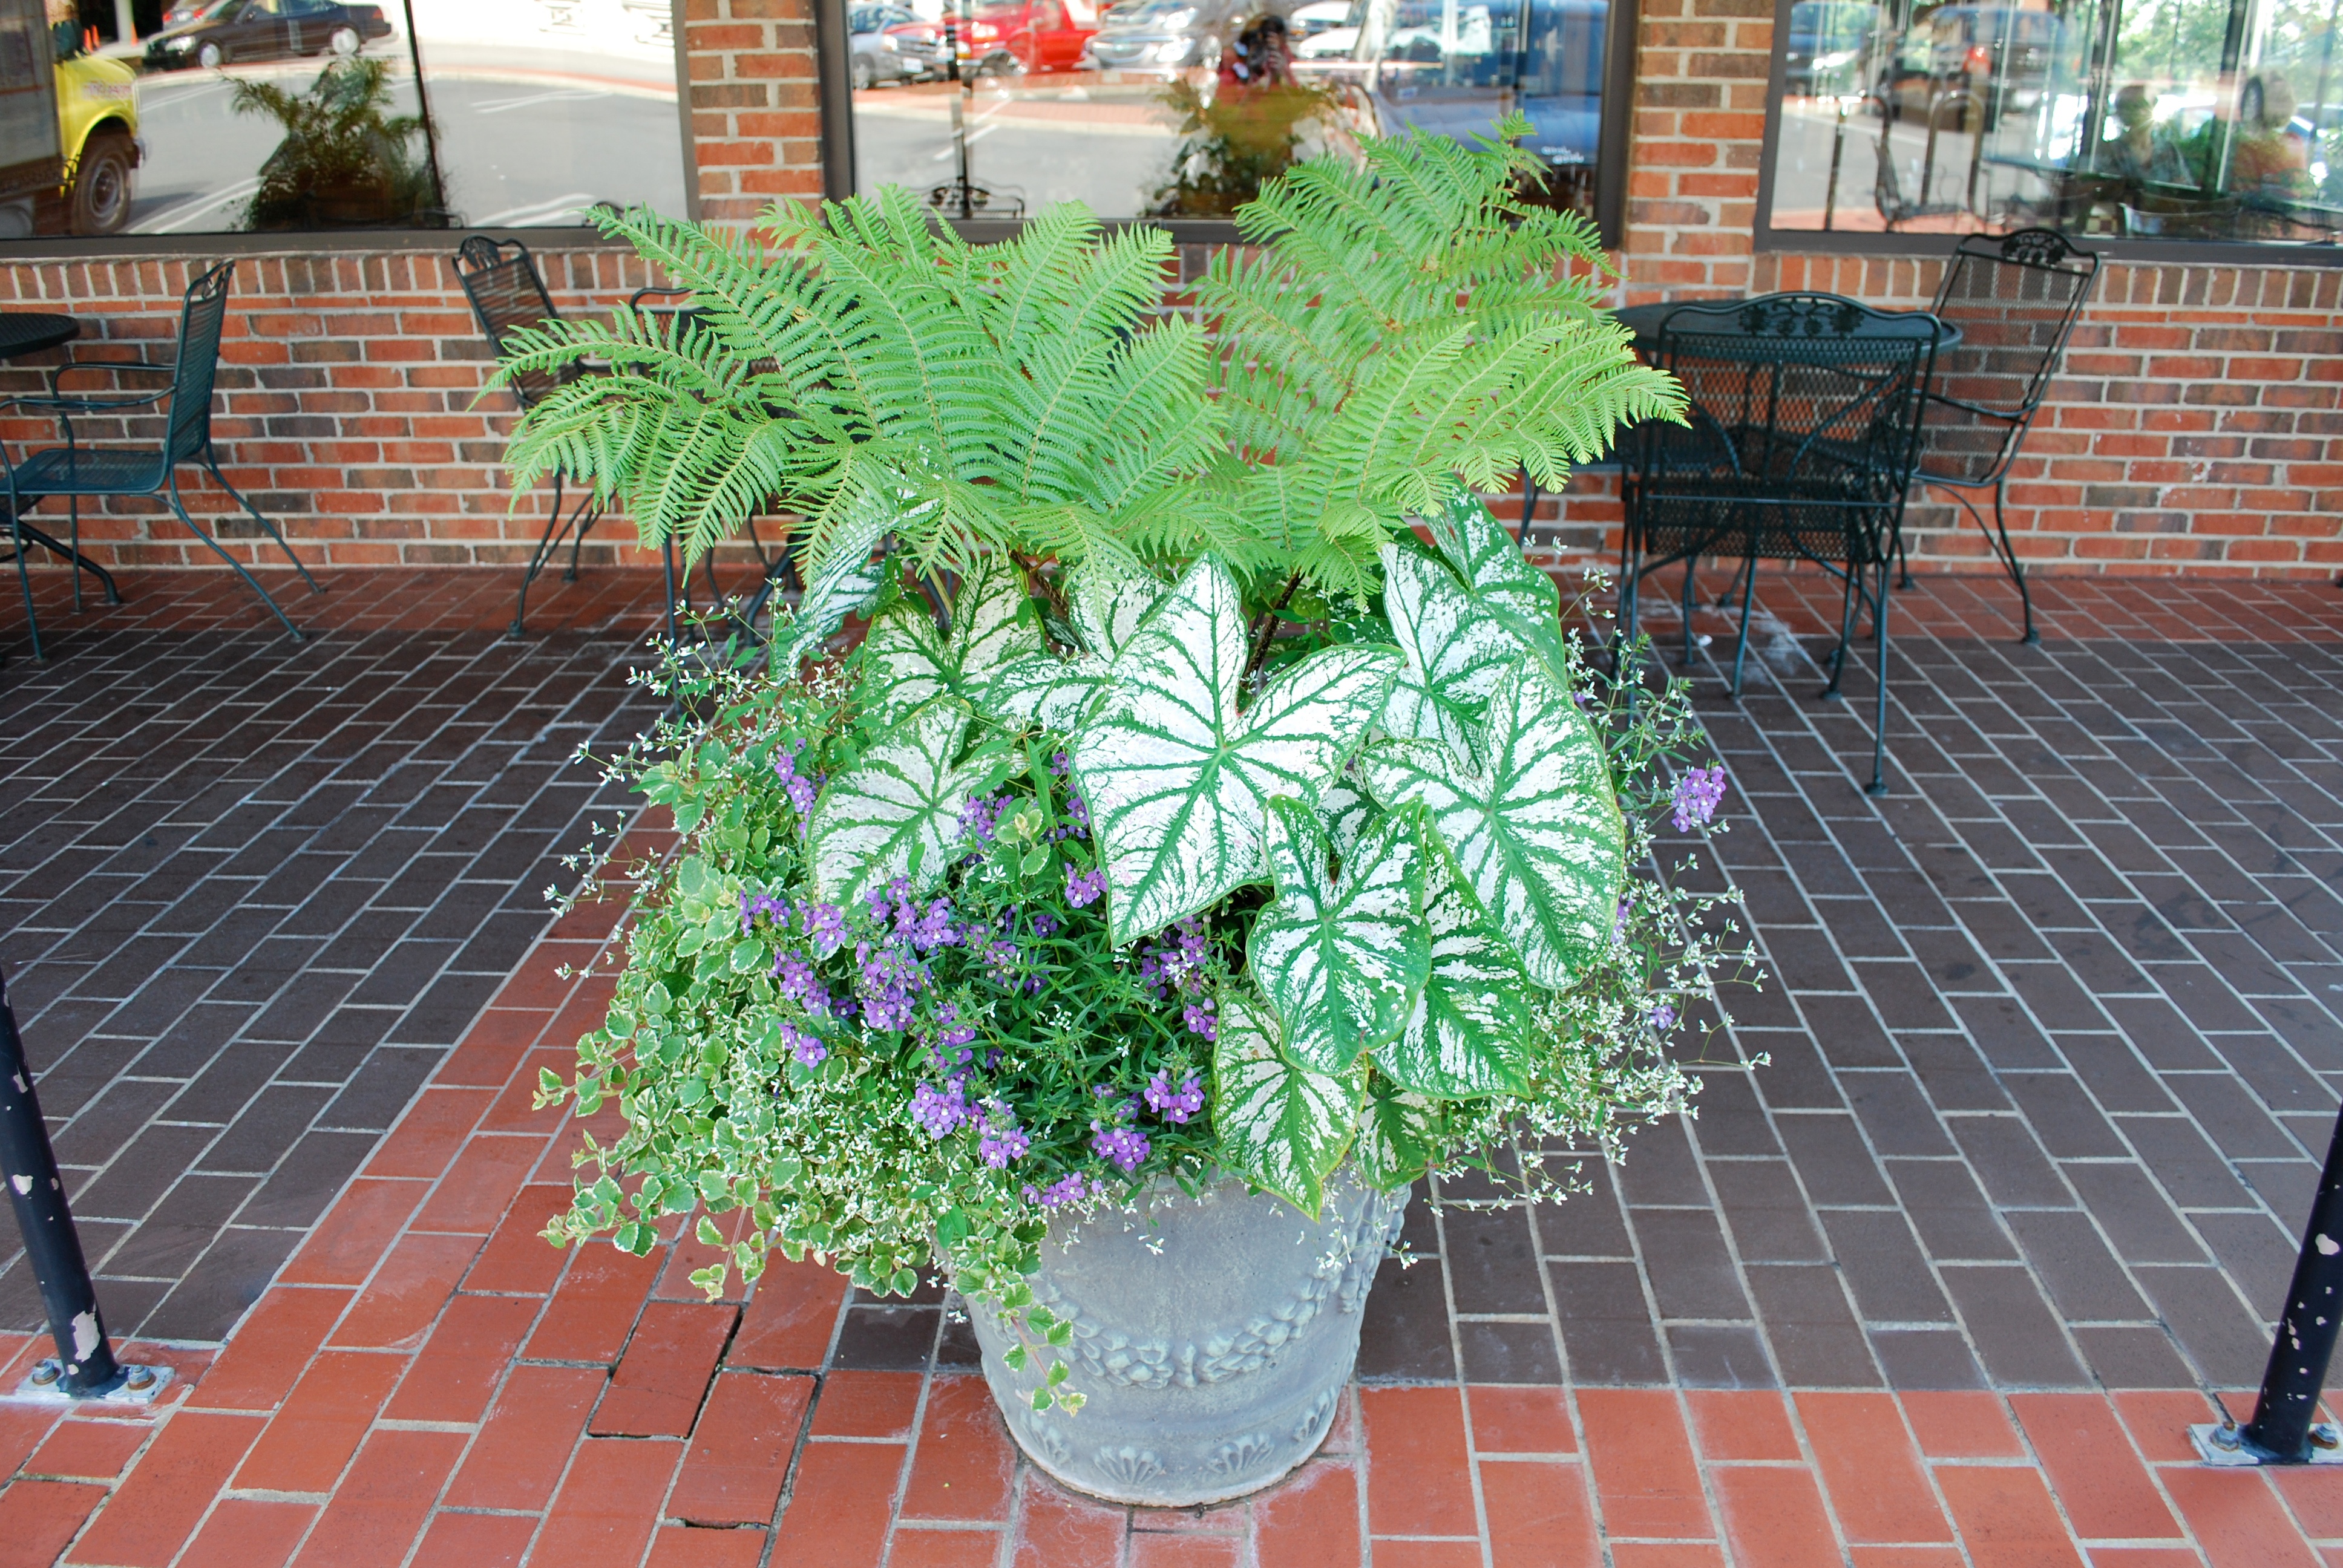 Retail landscape potted plant and sitting area